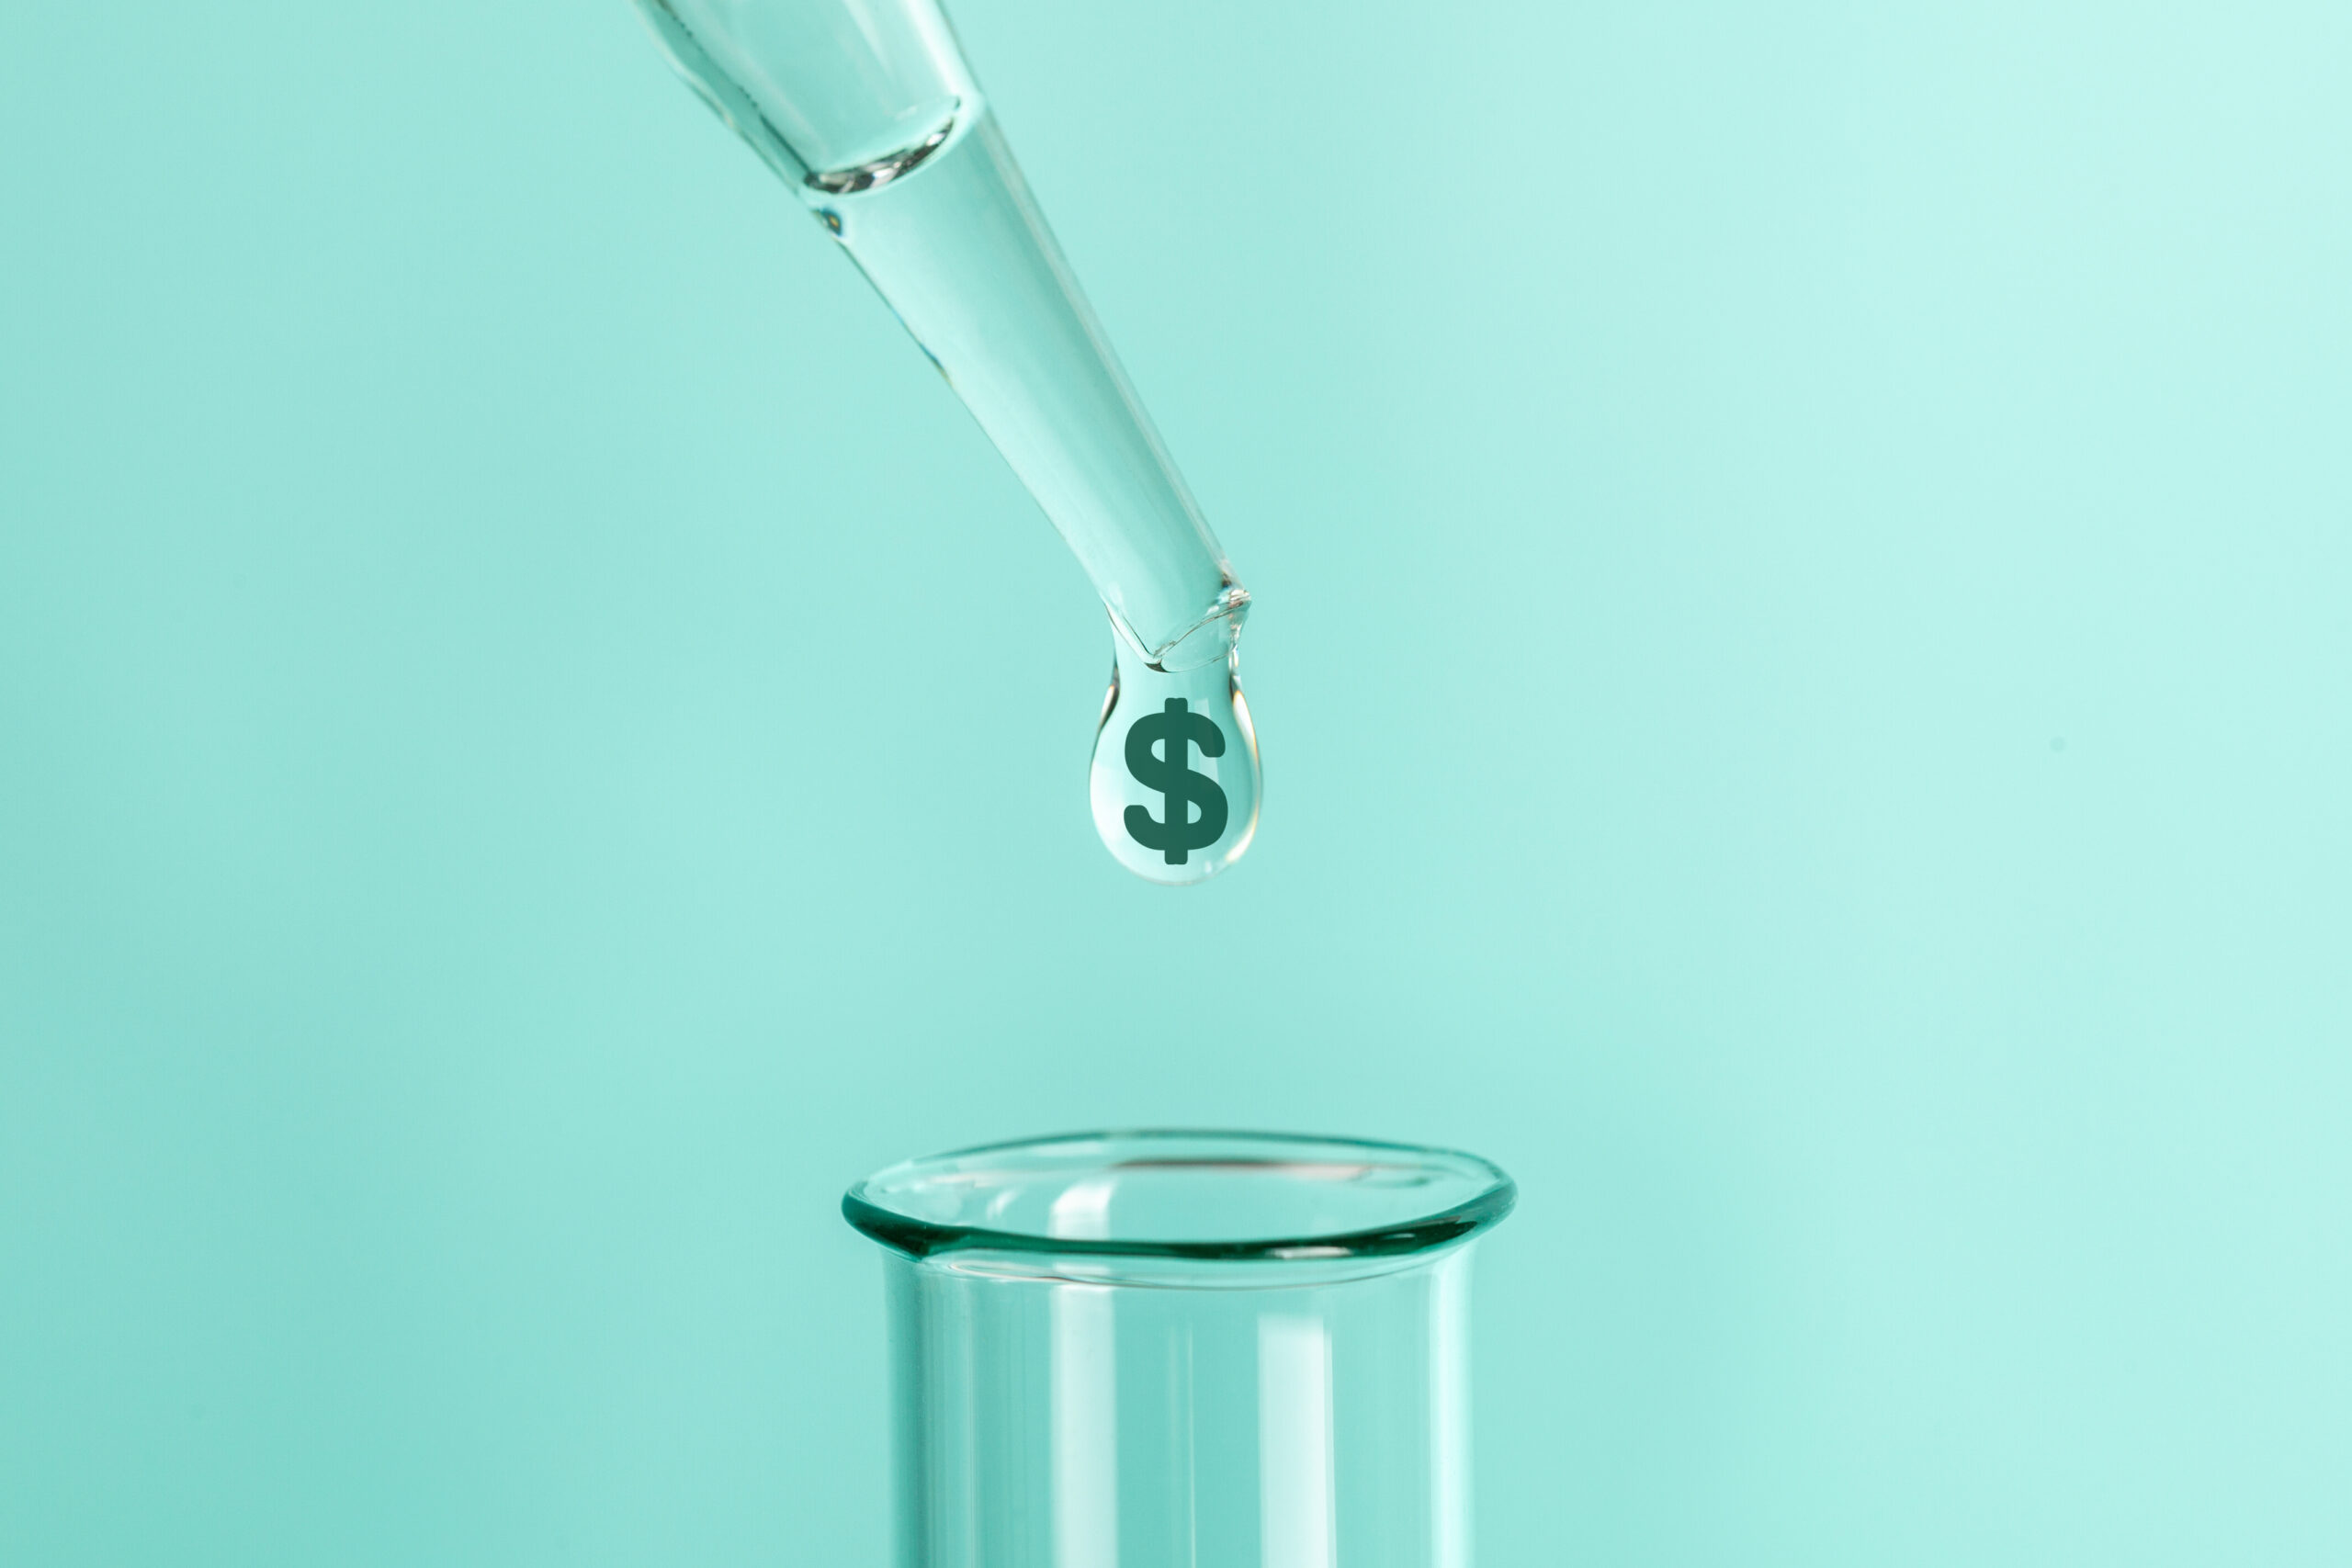 Green-Dollar-Sign-Drops-From-Pipette-to-Test-Tube